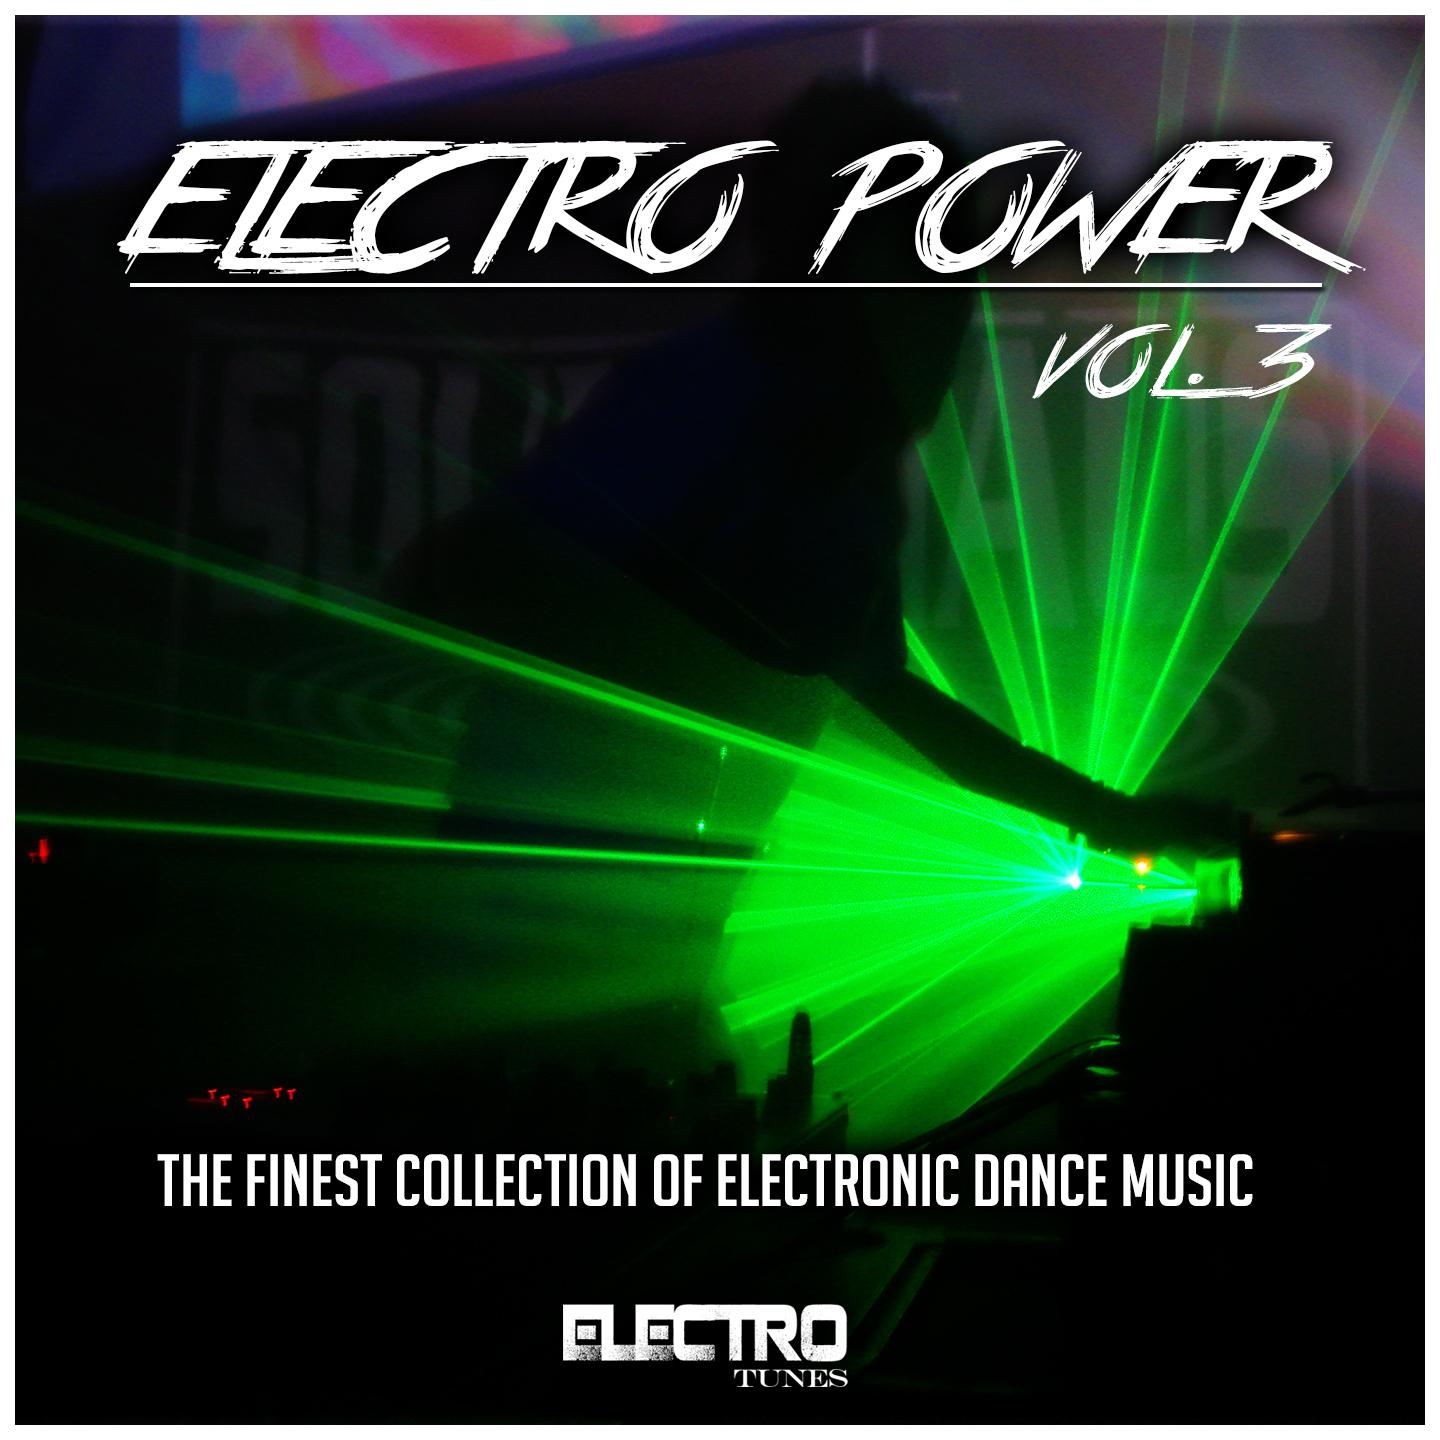 Electro Power, Vol. 3 (The Finest Collection of Electronic Dance Music)